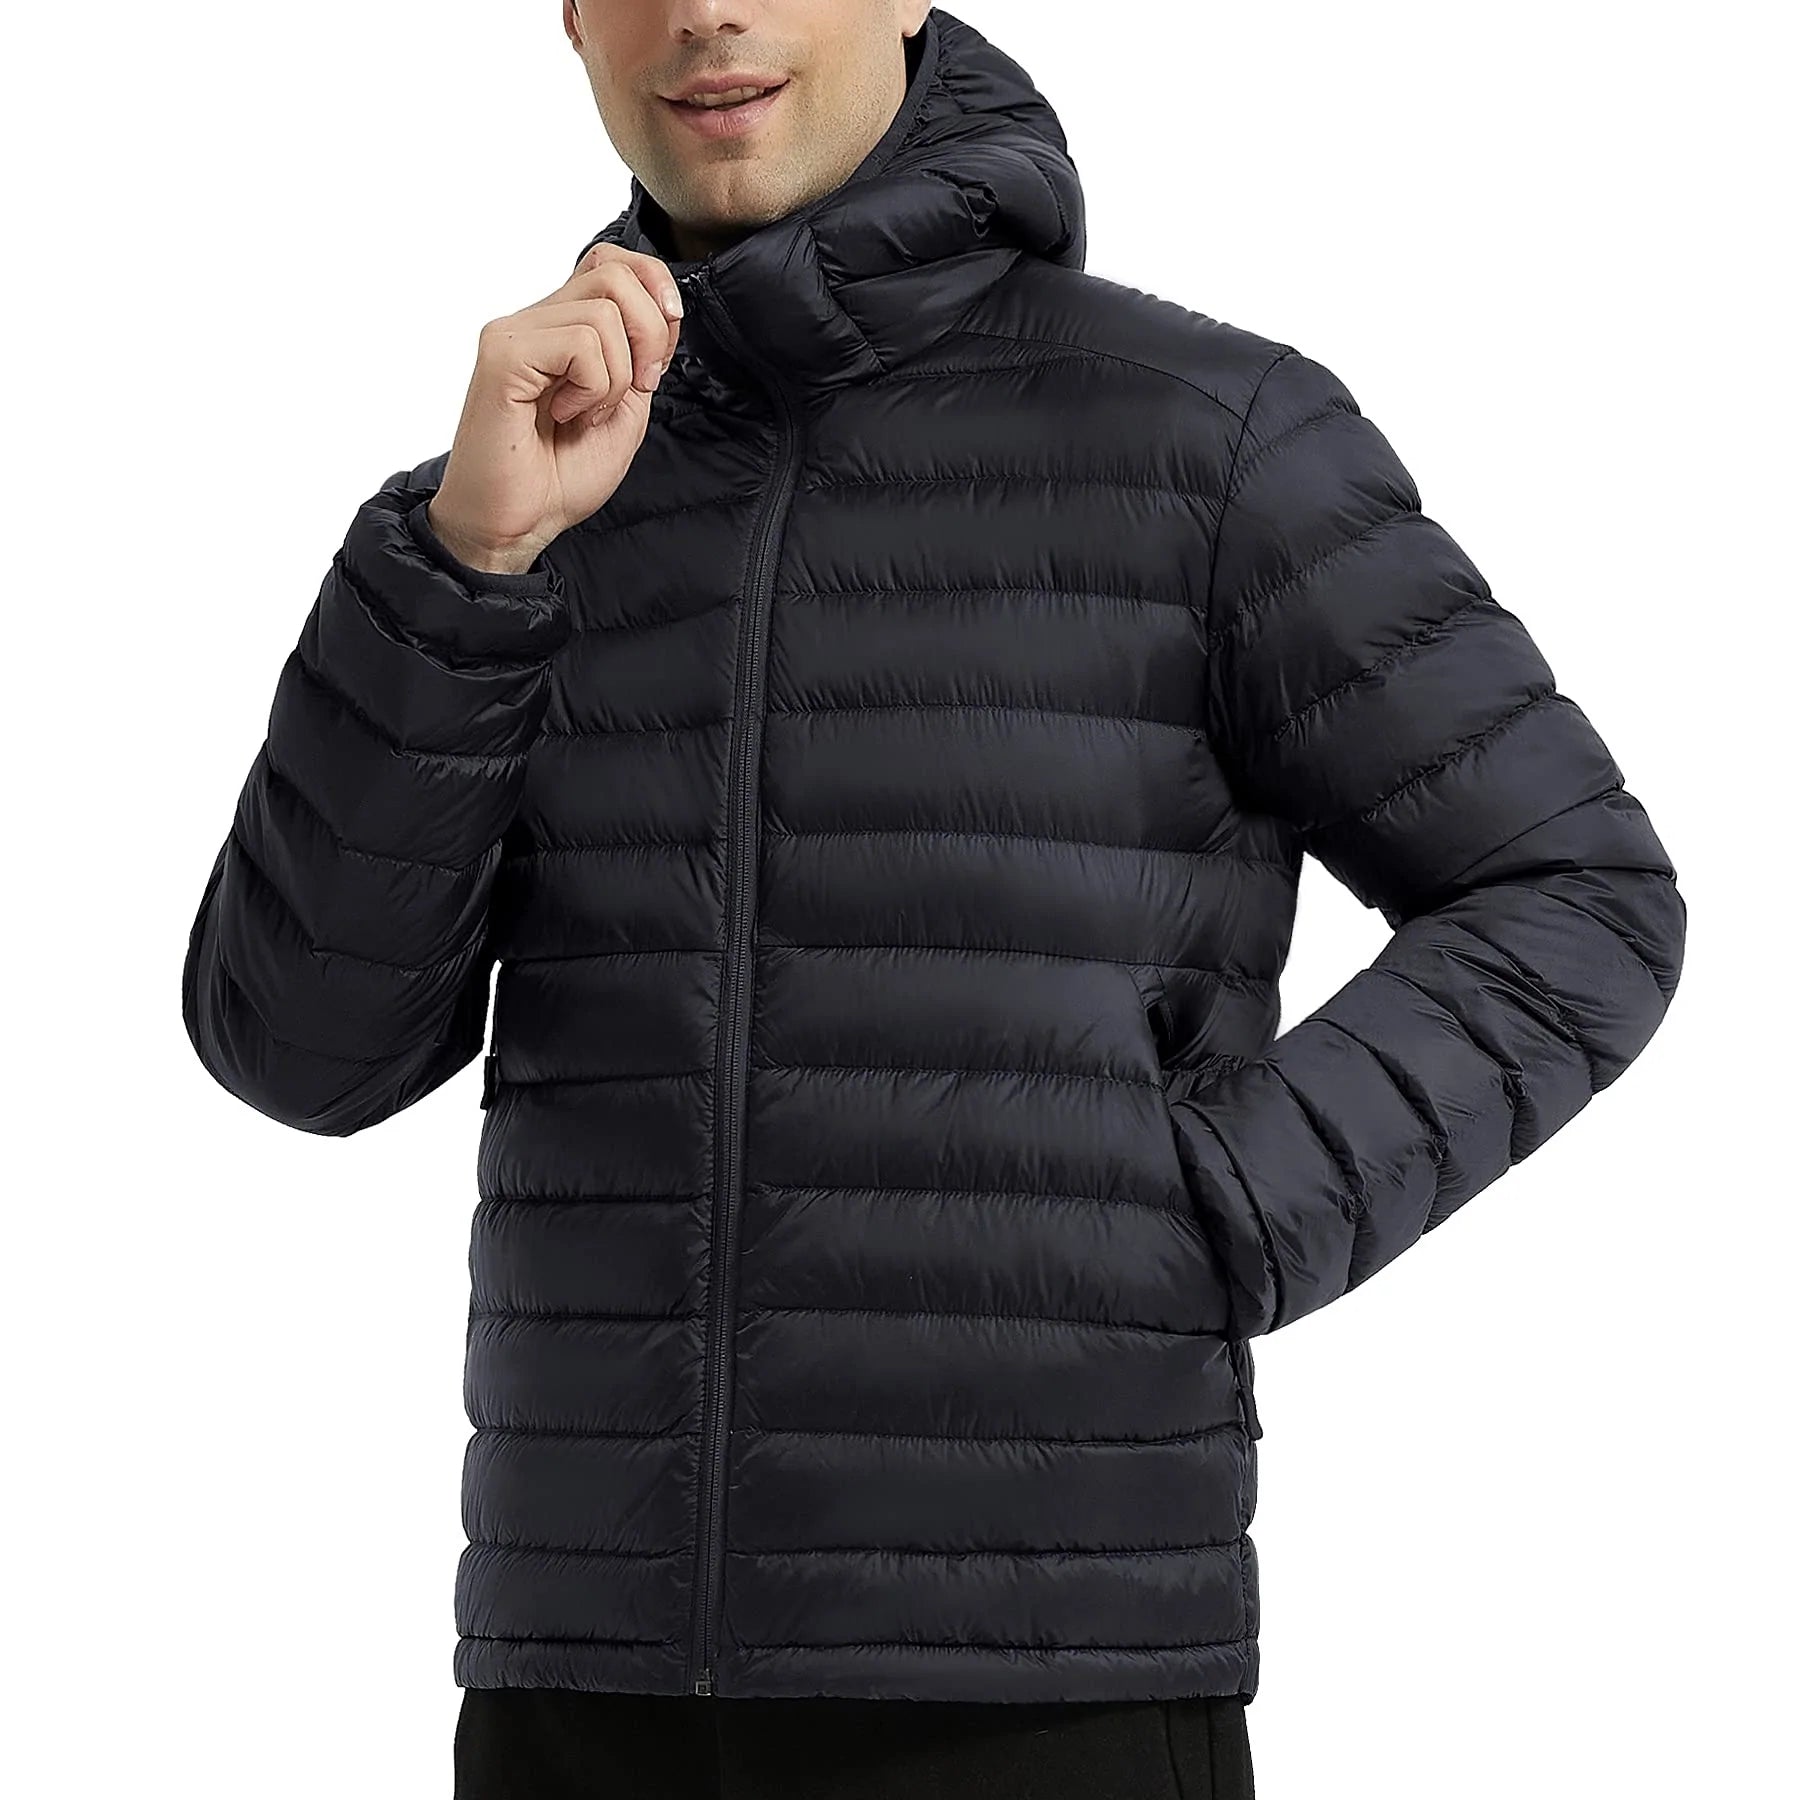 Packable jacket men's have gained immense popularity due to their versatility, convenience, and style. These lightweight and portable jackets